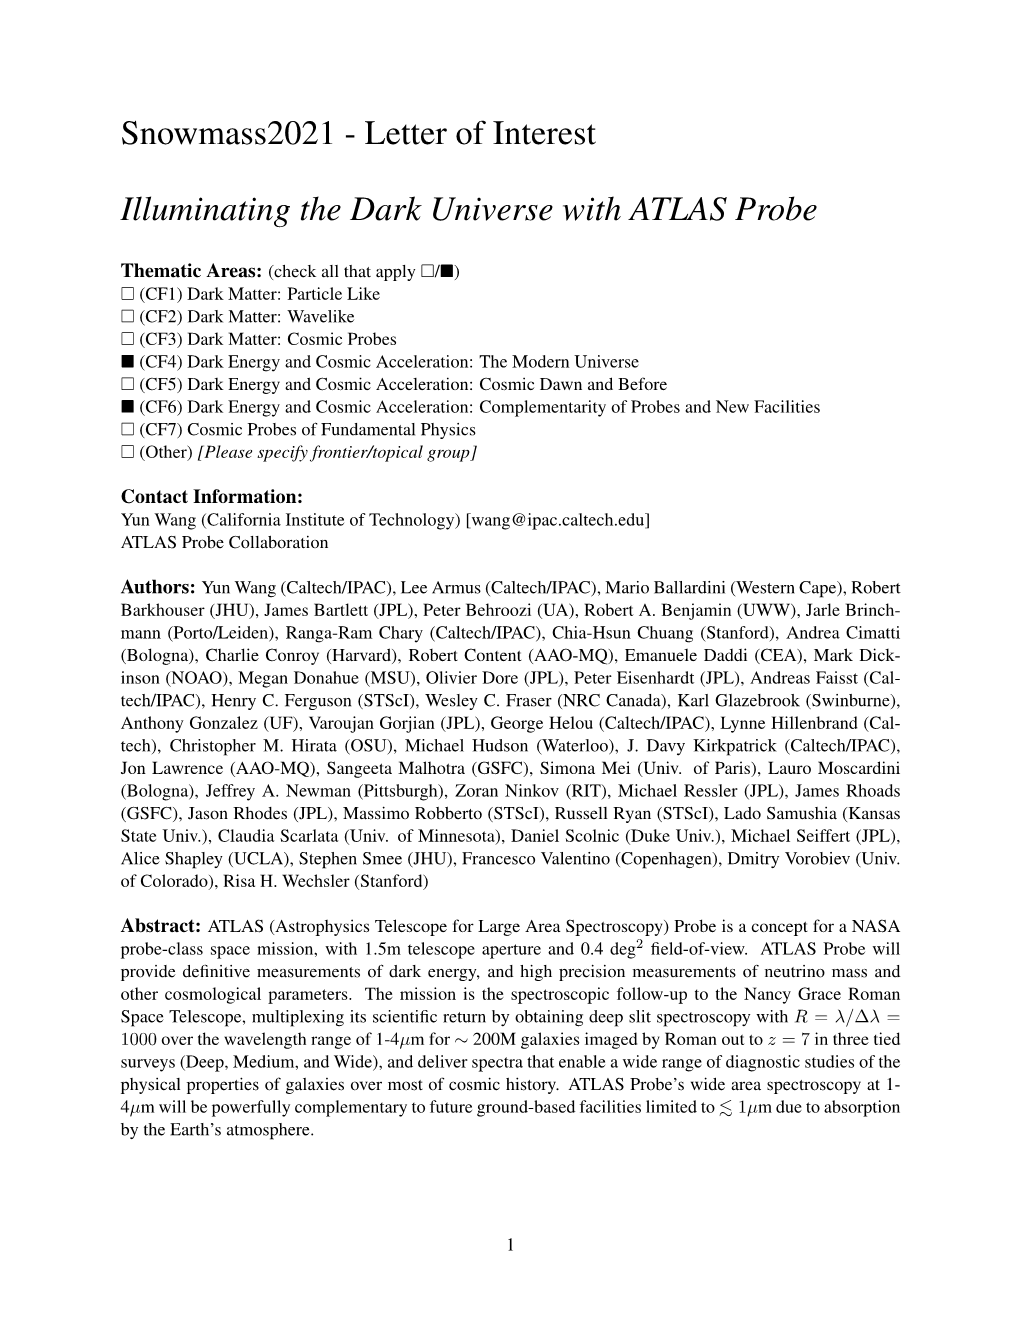 Letter of Interest Illuminating the Dark Universe With